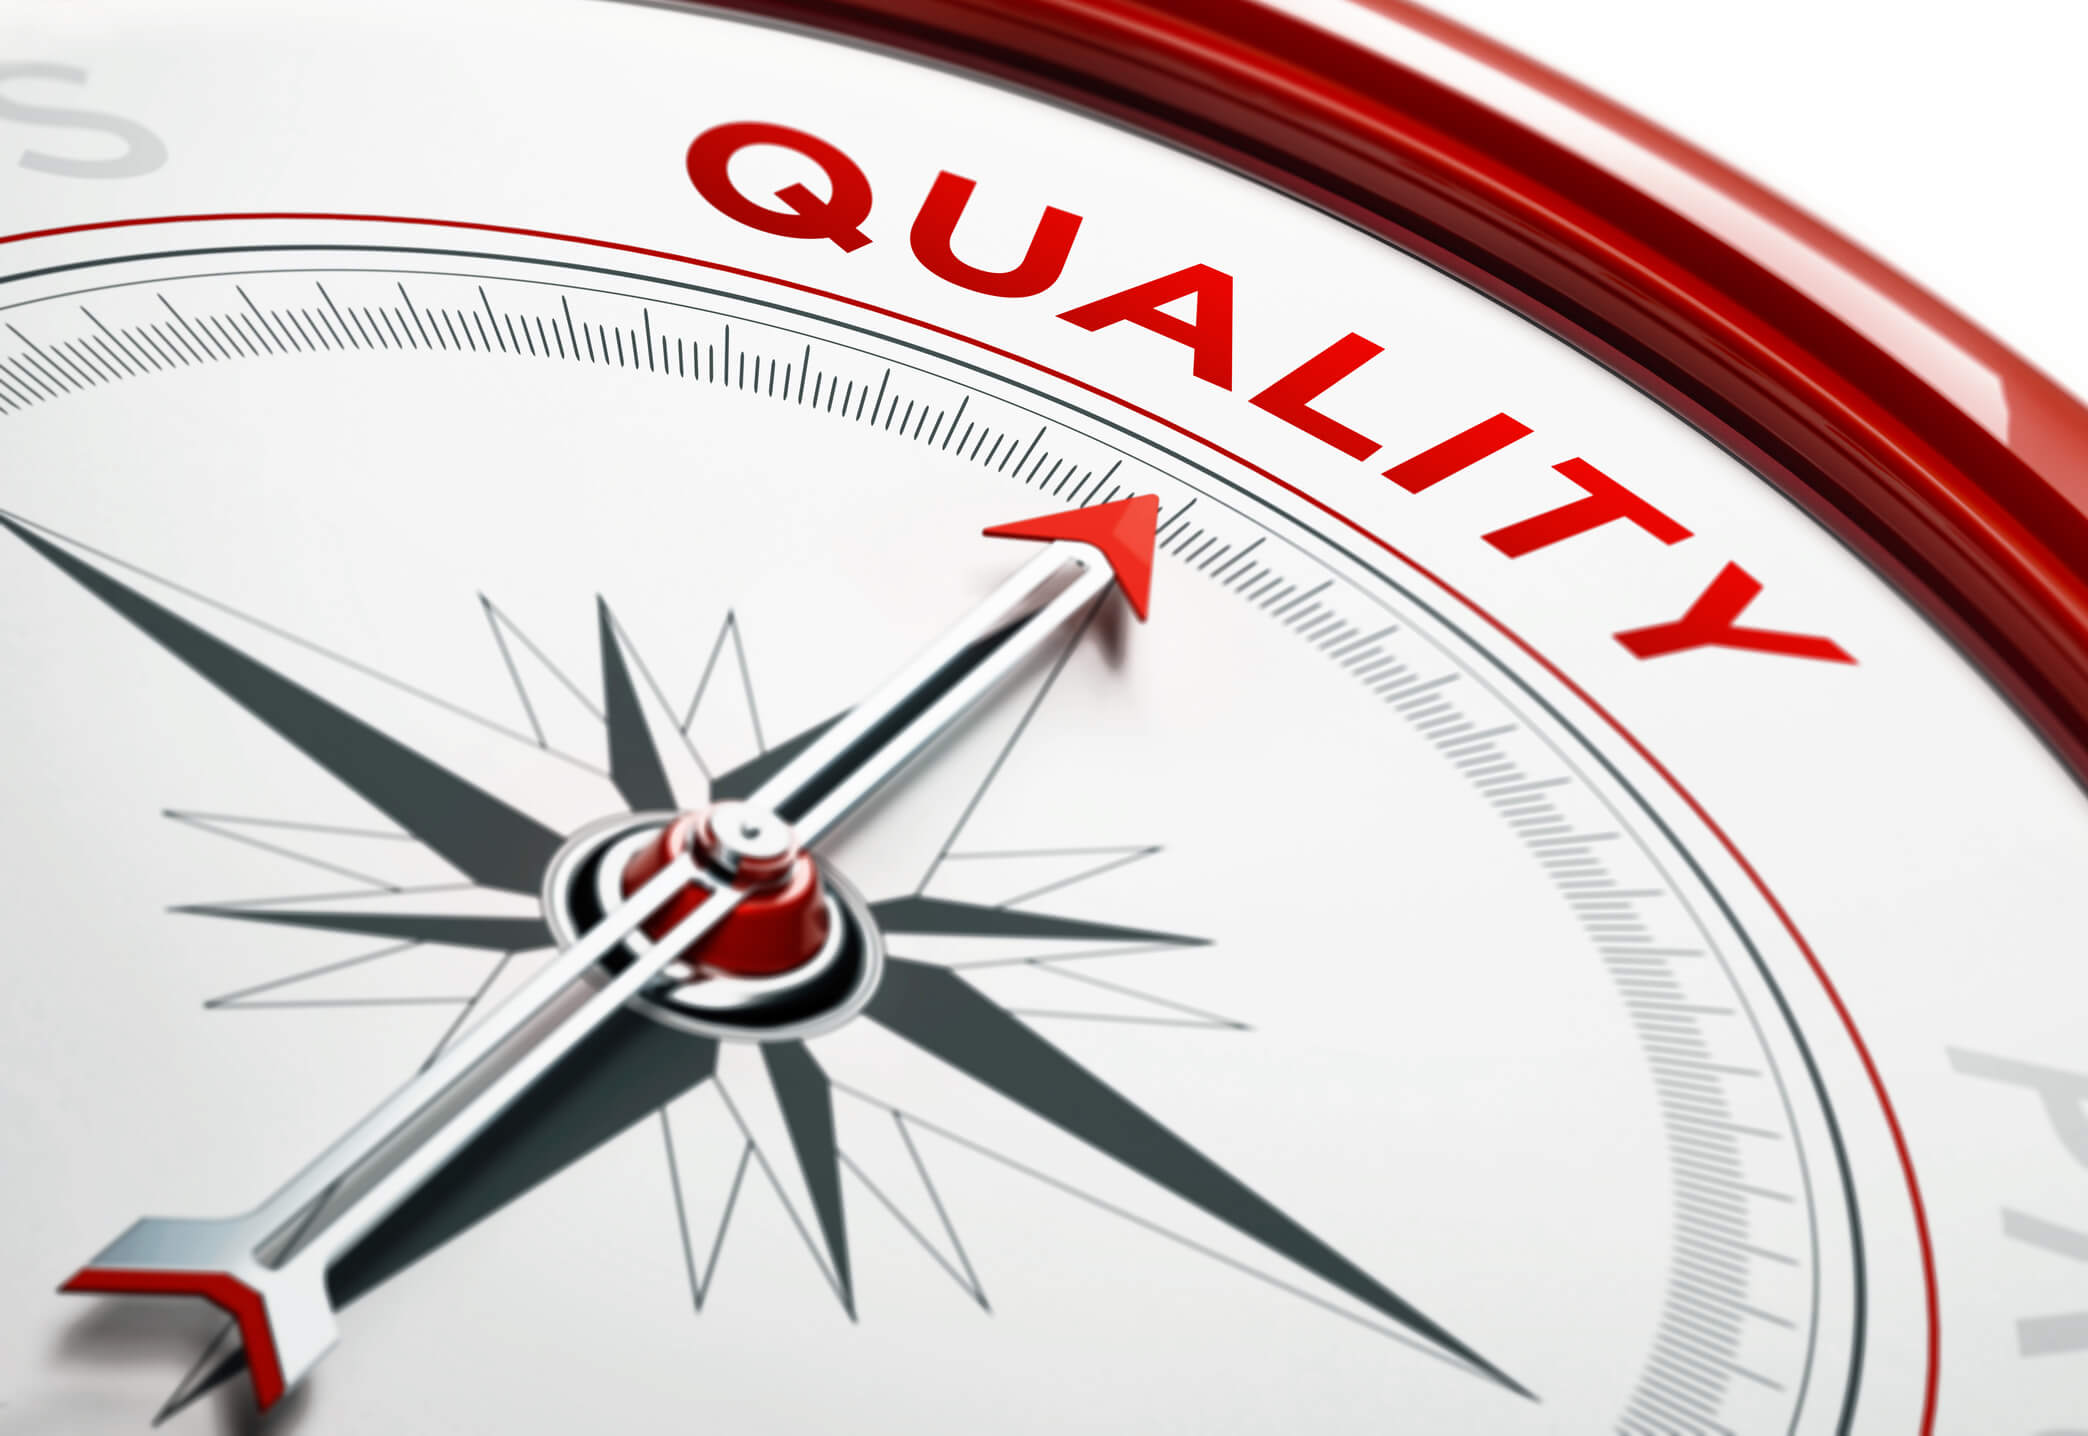 Improve Your Incident Management System With a Quality Audit